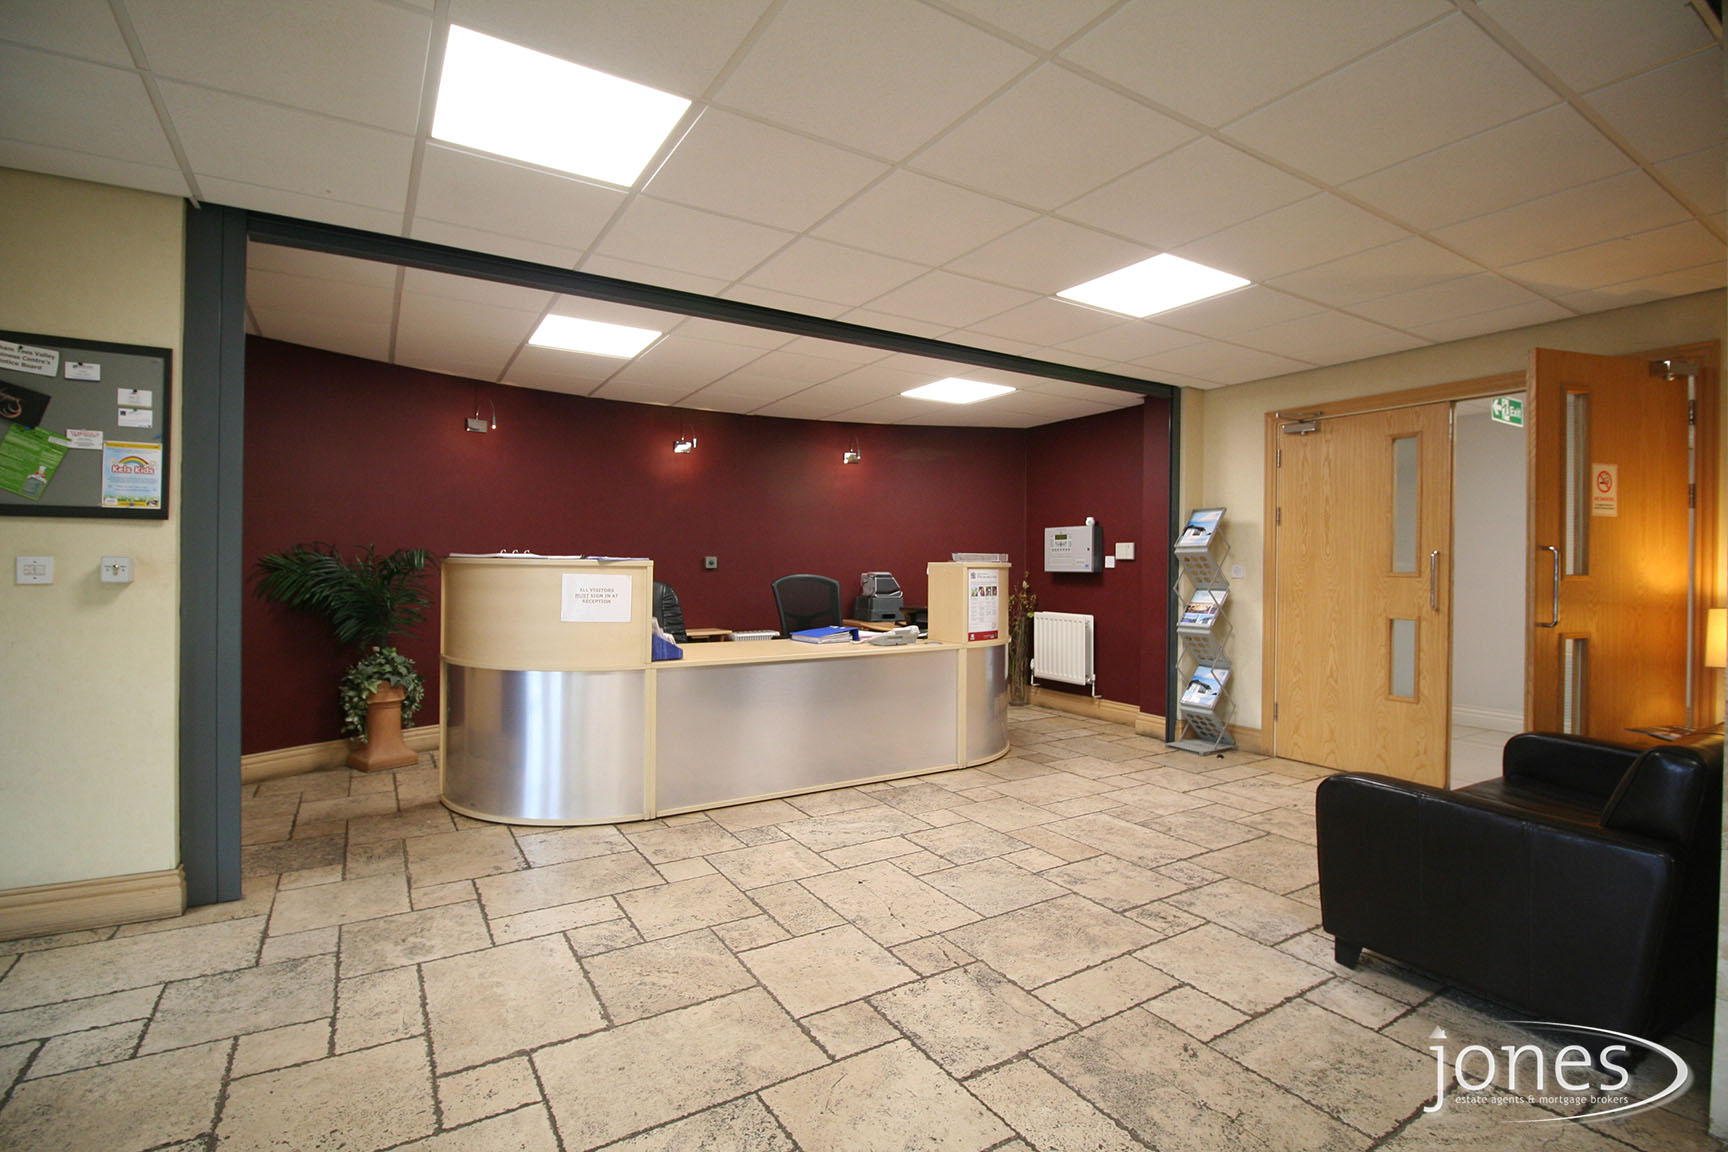 Home for Sale Let - Photo 02 Durham Tees Valley Business Centre,Orde Wingate Way,Stockton on Tees, TS19 0GD